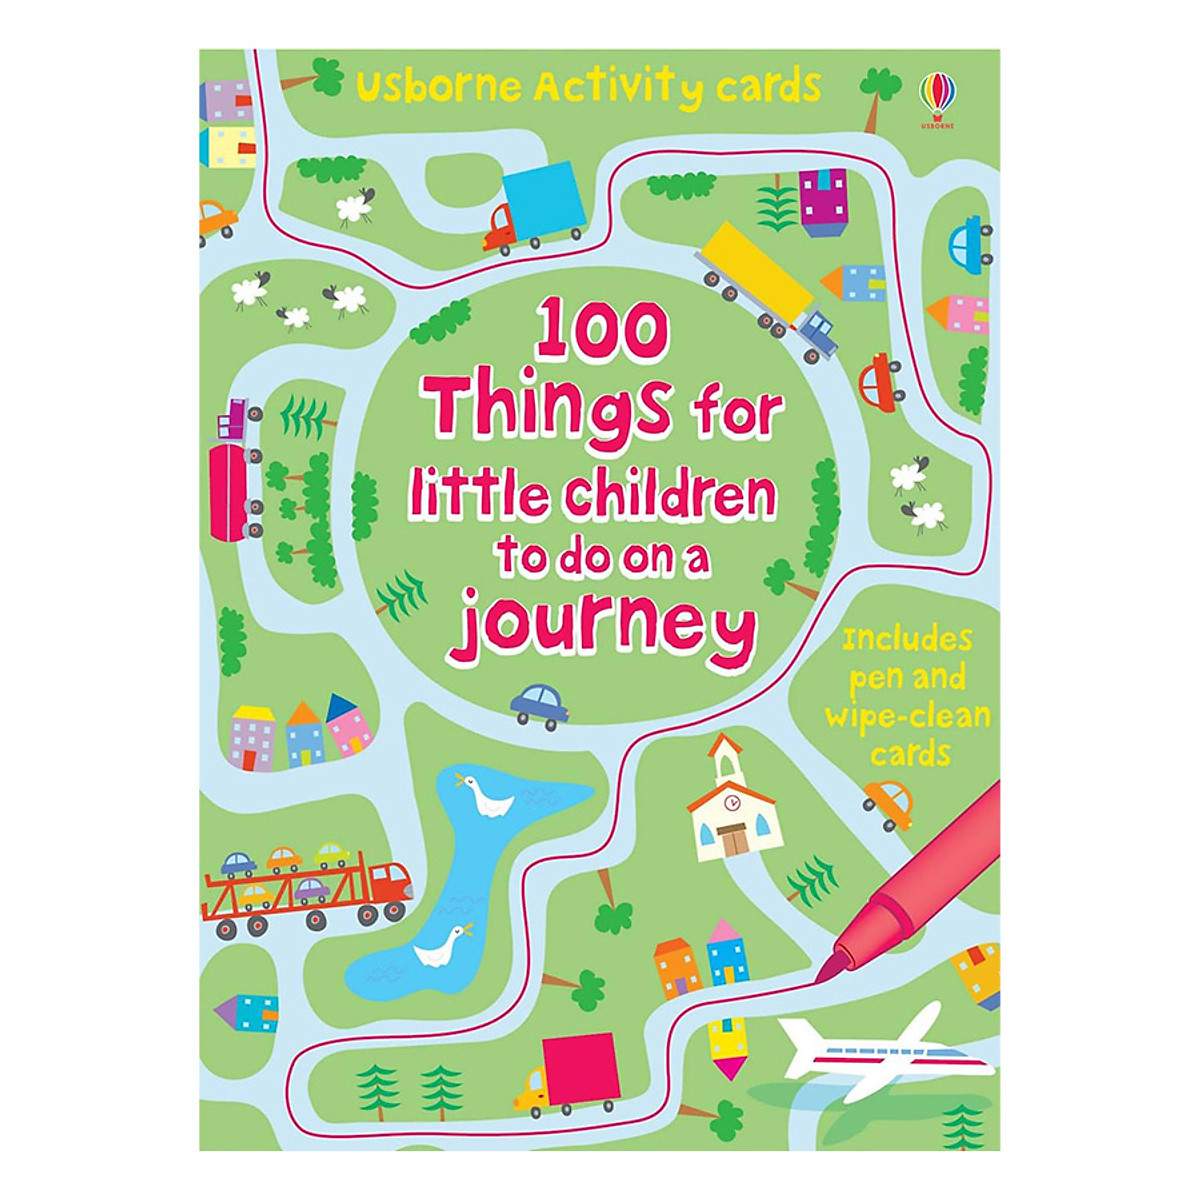 Flashcards tiếng Anh - Usborne 100 Things for little children to do on a journey